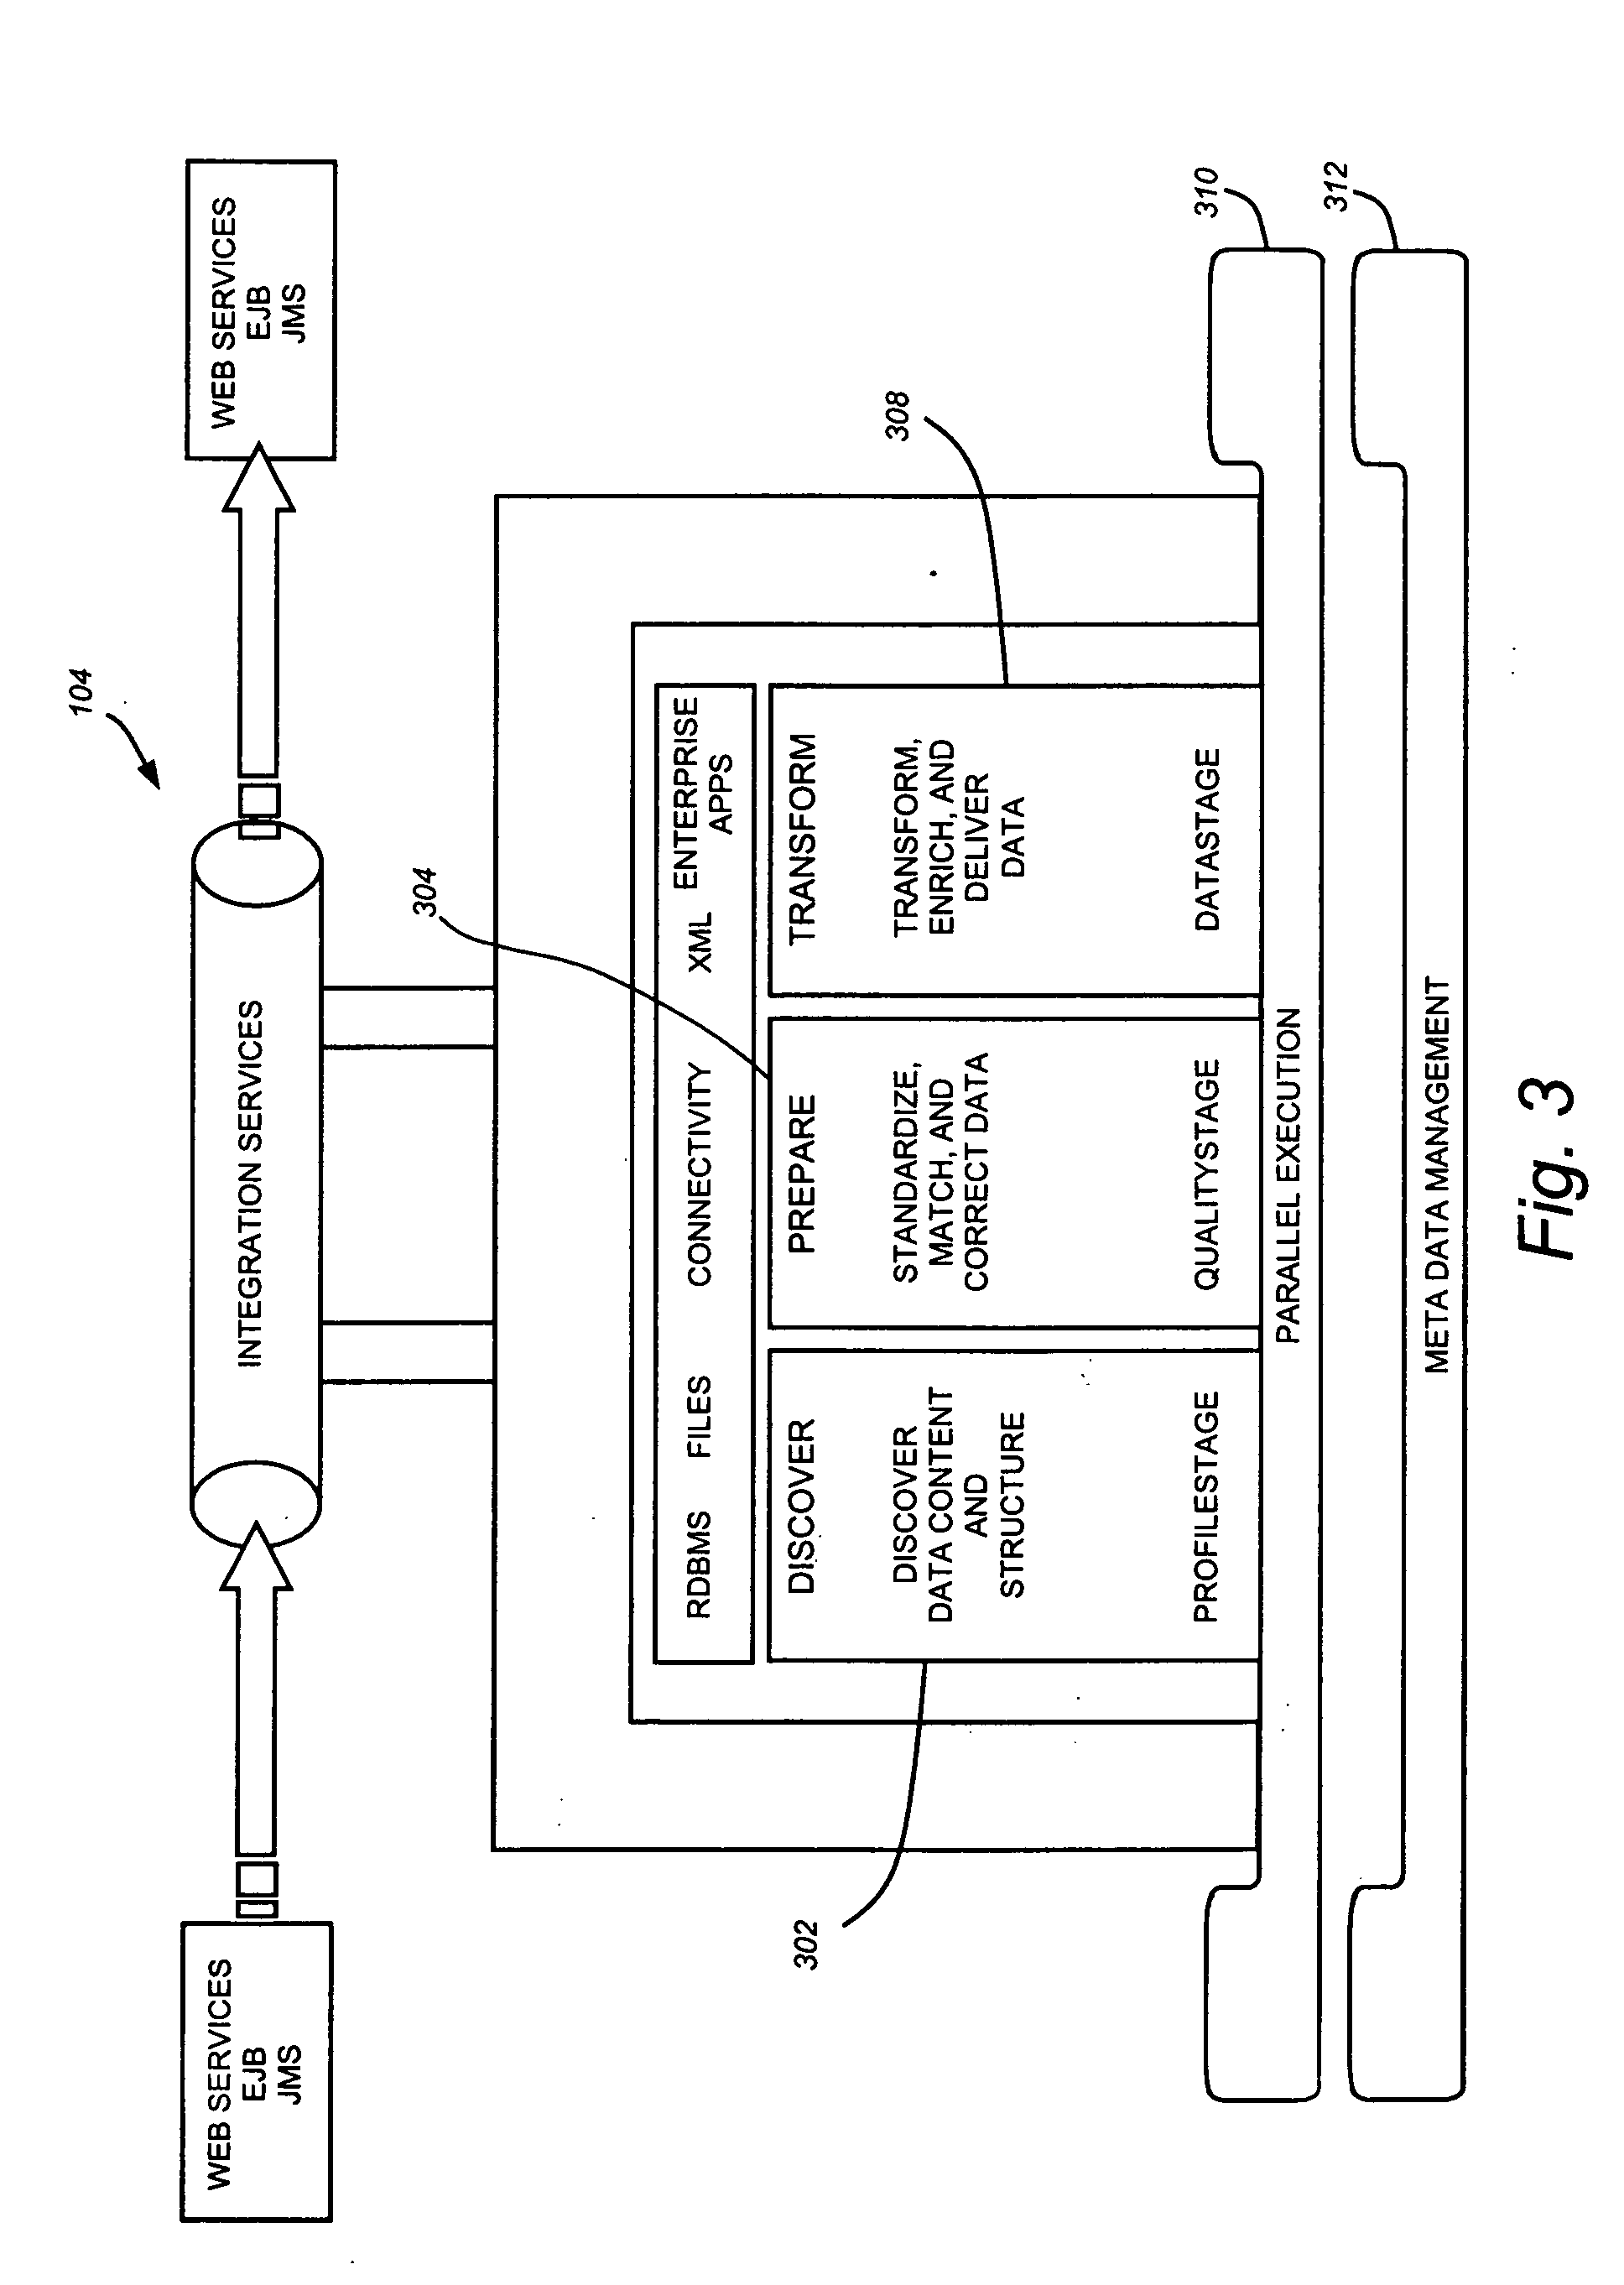 Service oriented architecture for an extract function in a data integration platform